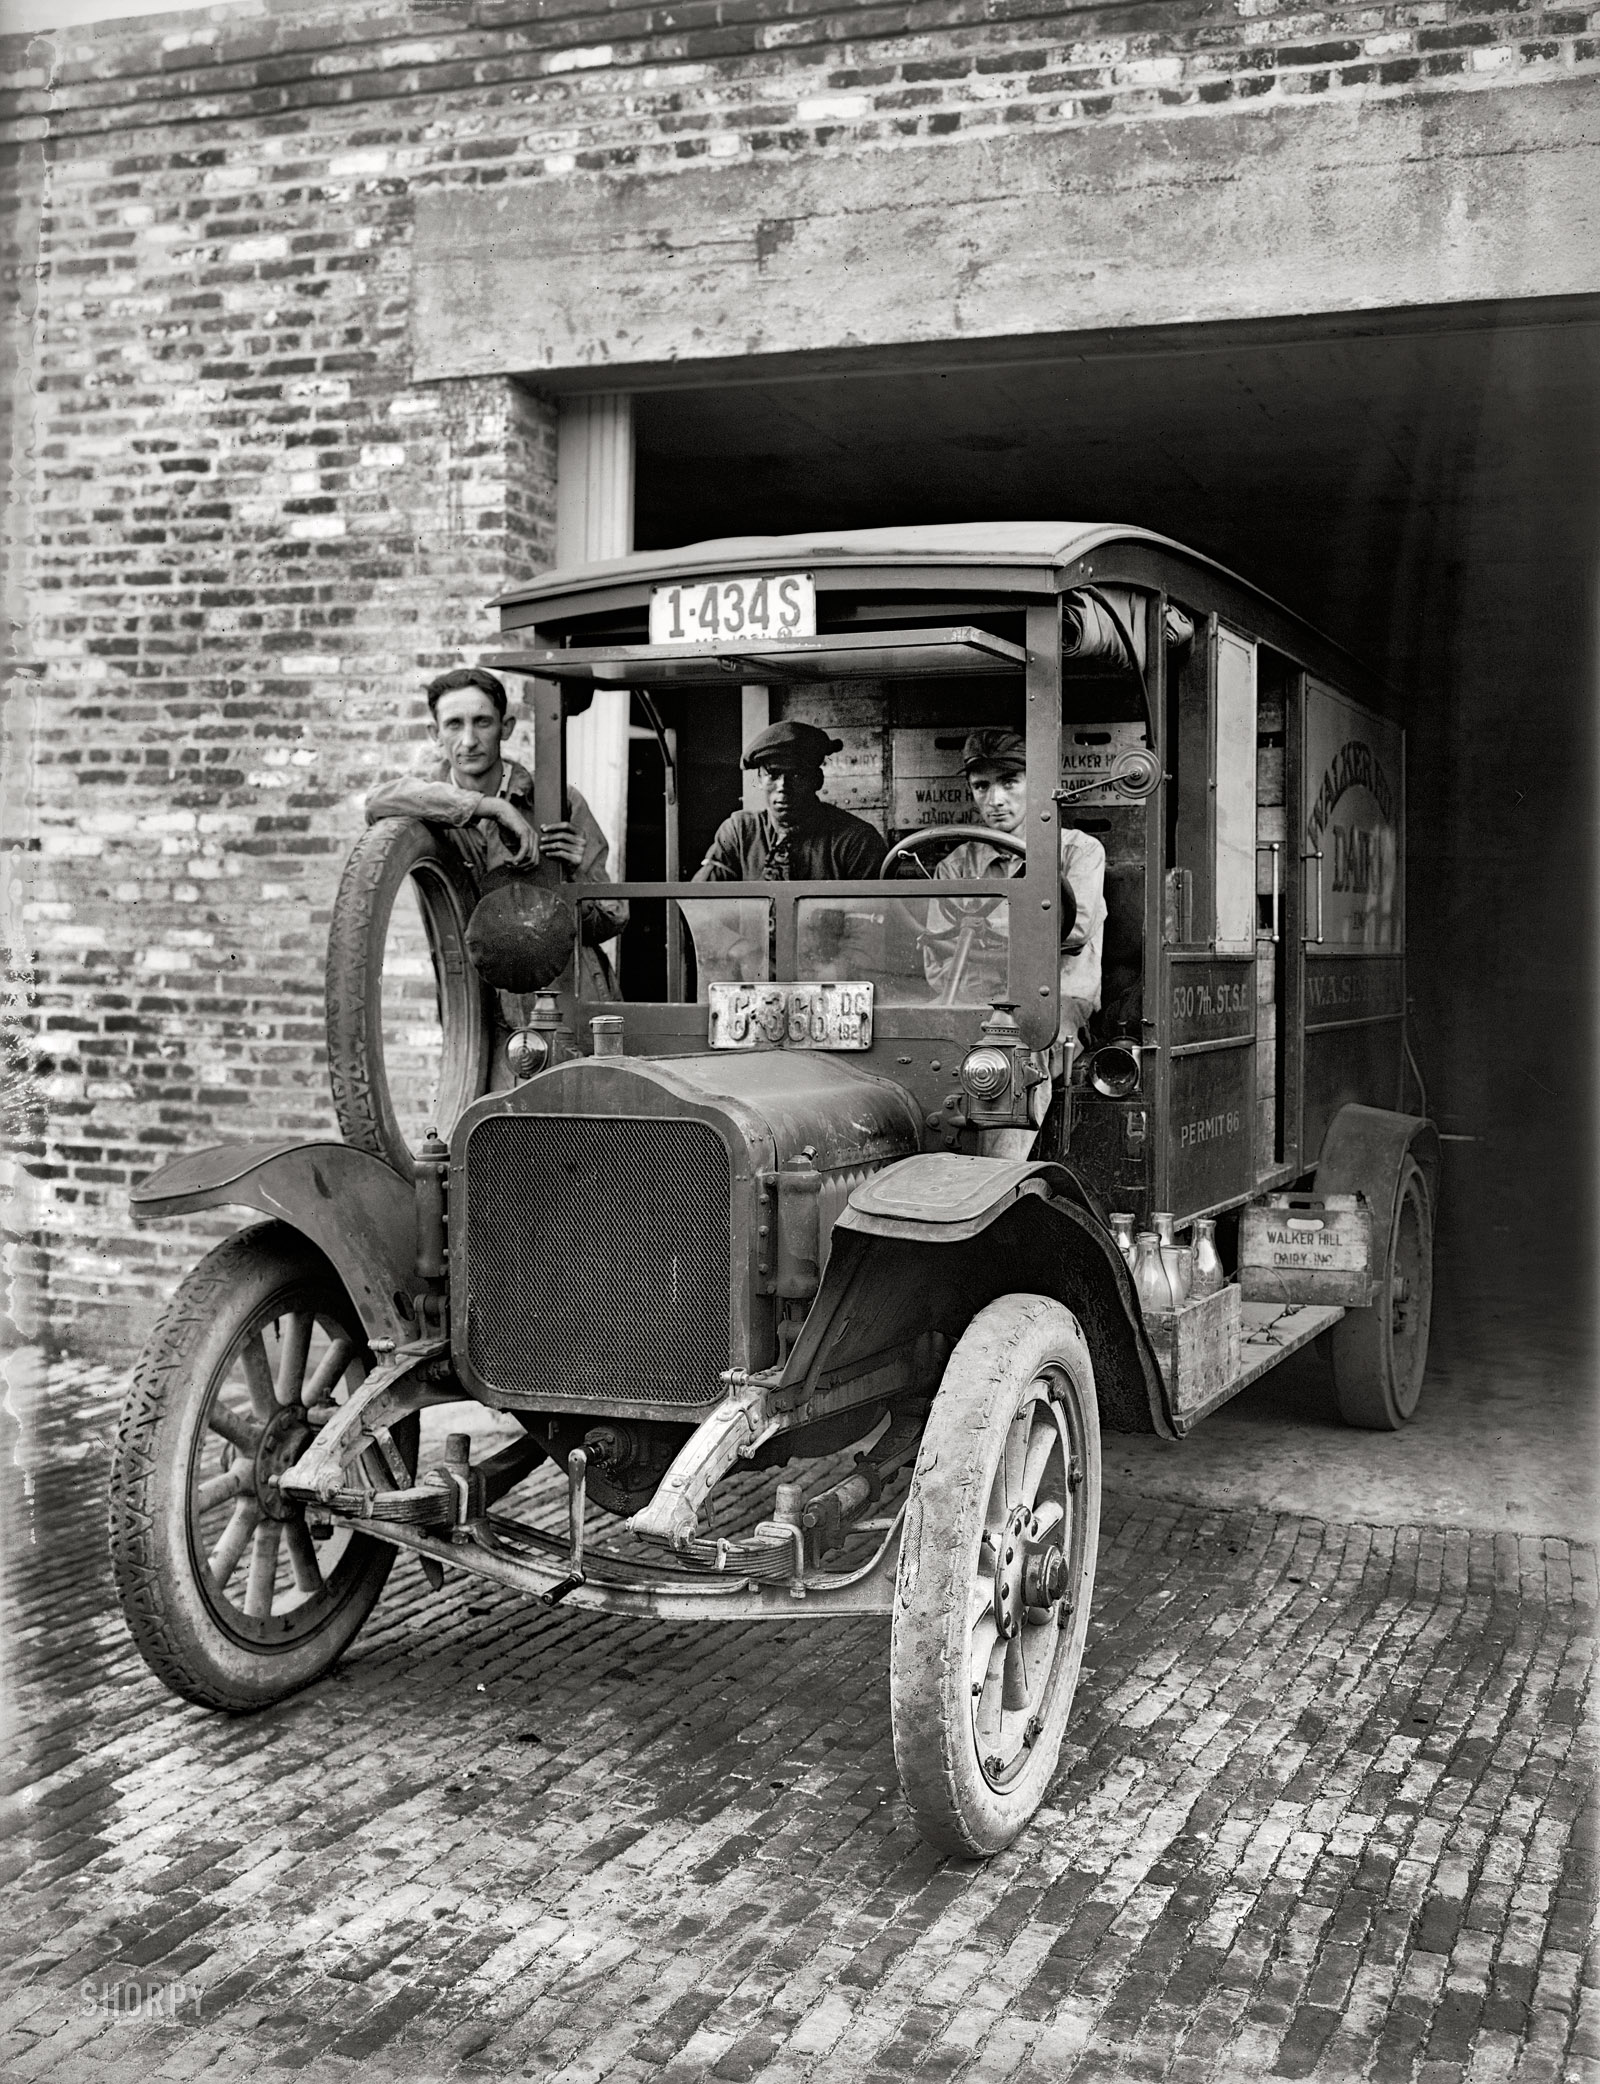 Washington, D.C., circa 1921. "Walker Hill Dairy." And a milk truck that's been around the block a few times. National Photo Co. glass negative. View full size.